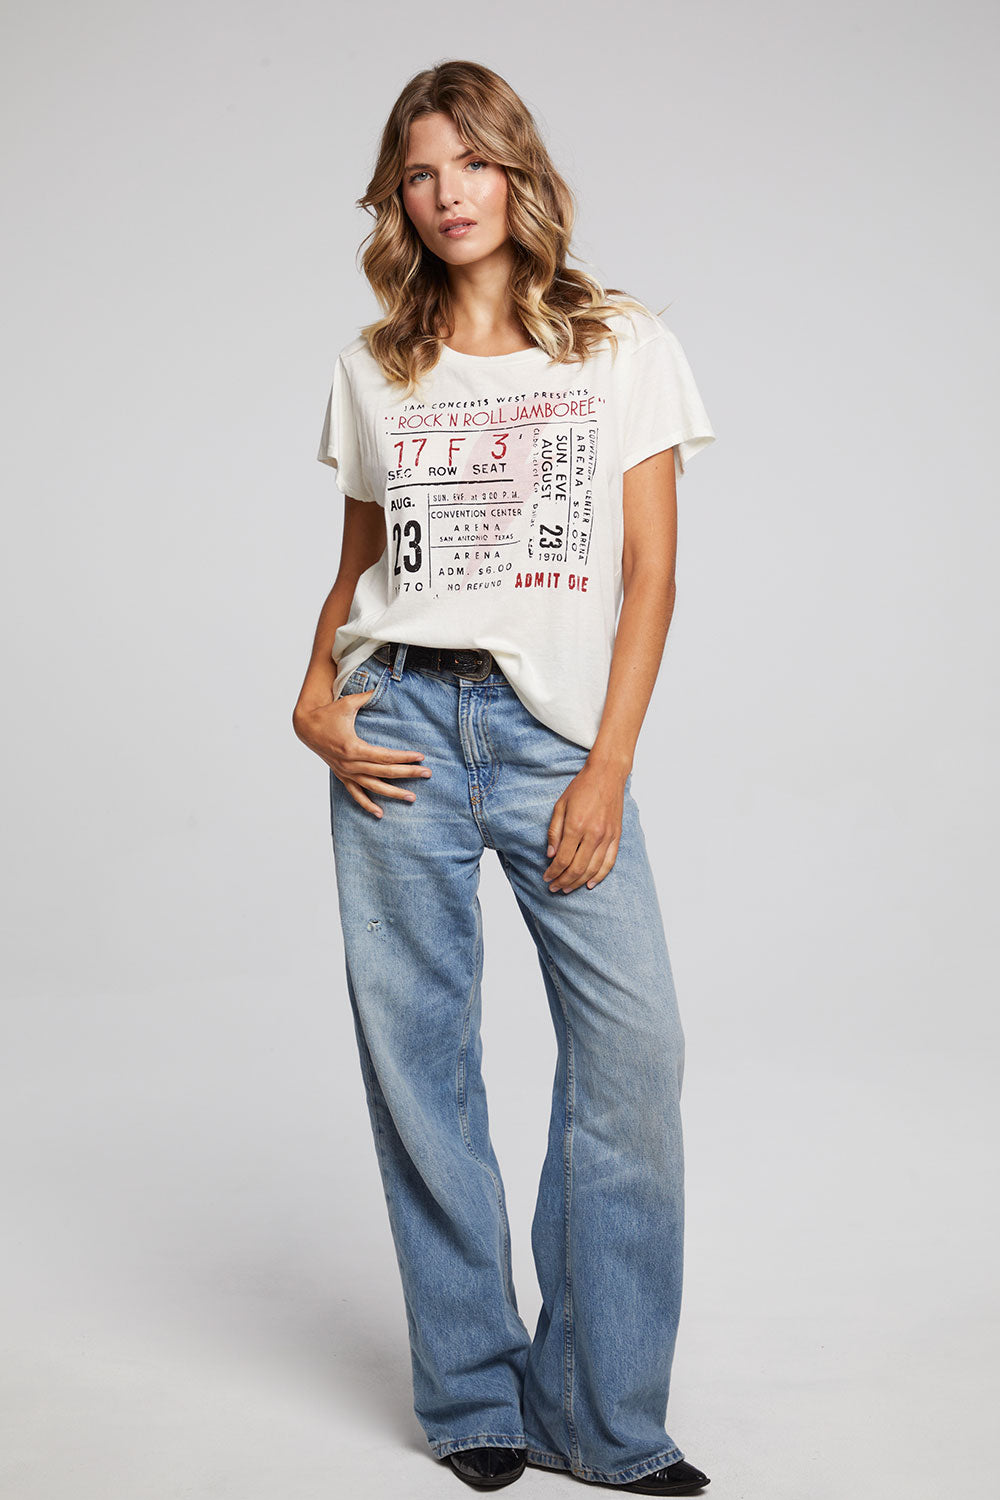 Concert Ticket Tee WOMENS chaserbrand